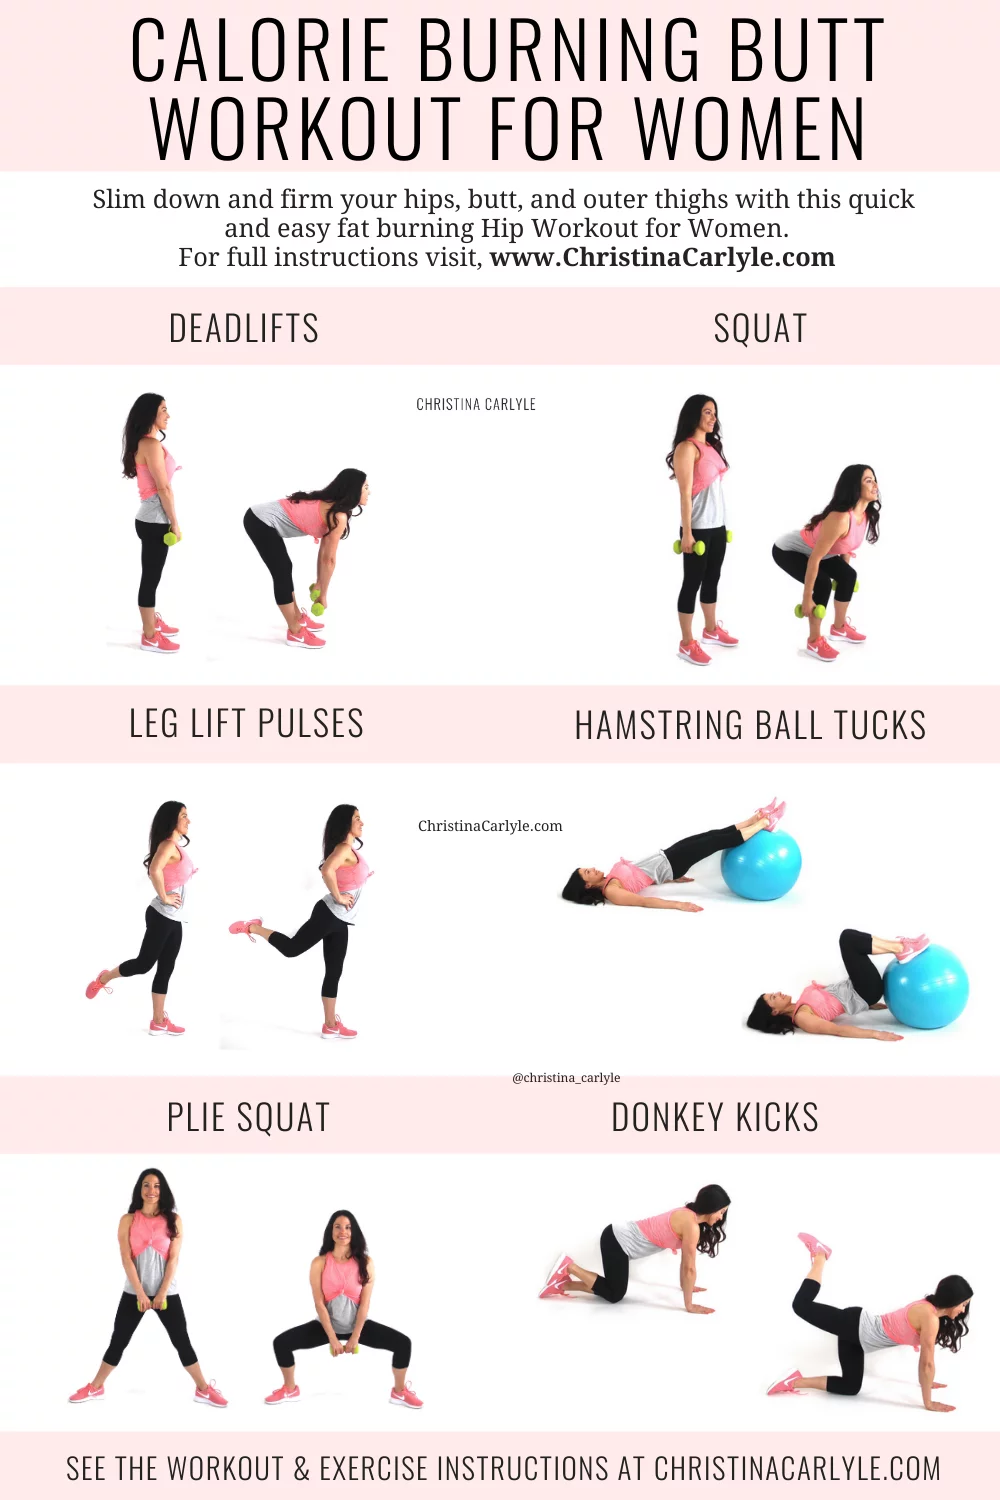 Butt Workout for Women with 6 butt exercises being done by trainer Christina Carlyle